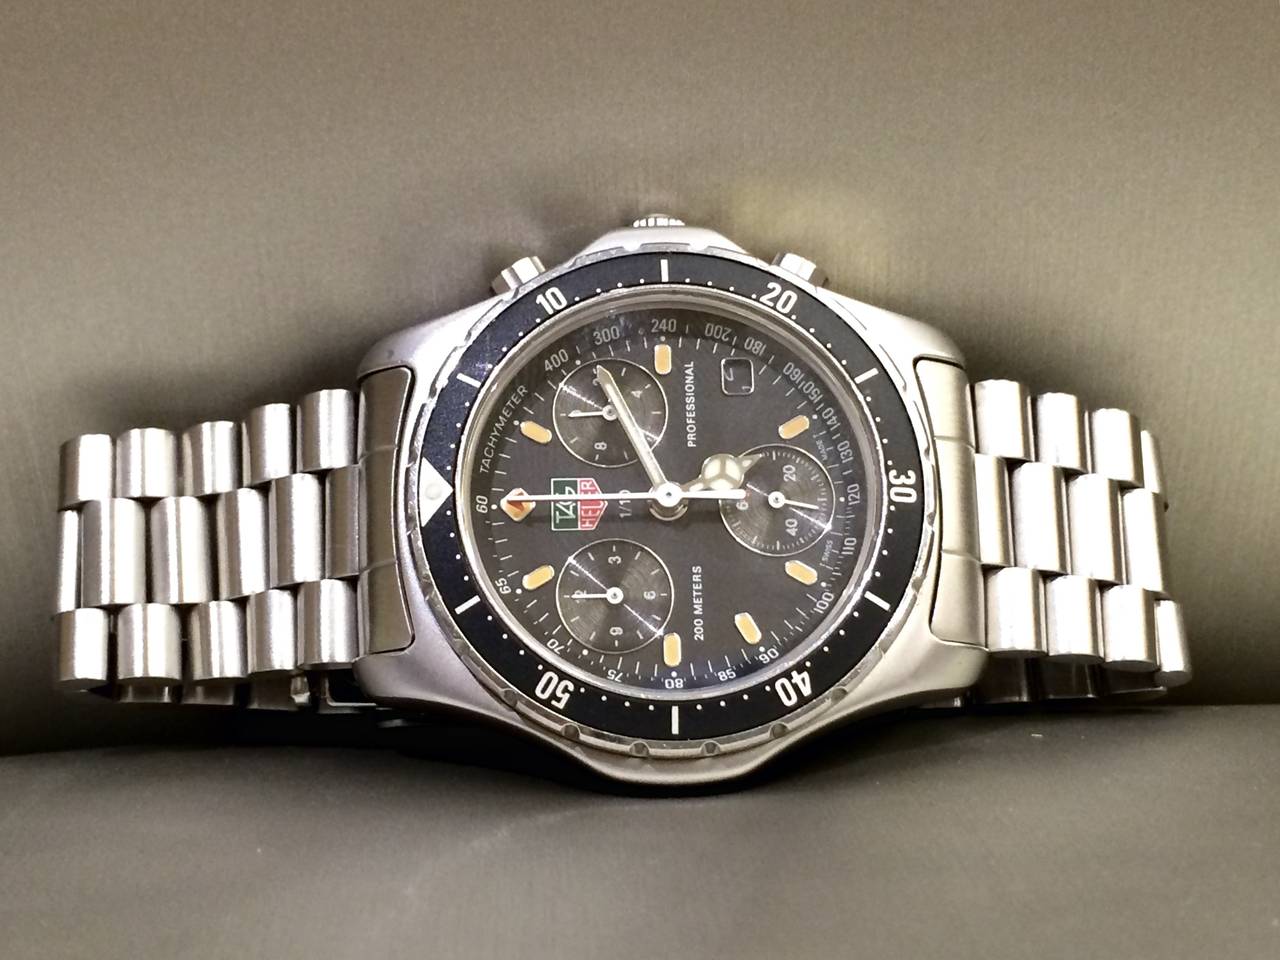 One Pre-Owned TAG Heuer Professional Wristwatch, Black Dial, Black Bezel, Quartz Movement, Comes with Box, As Pictured.